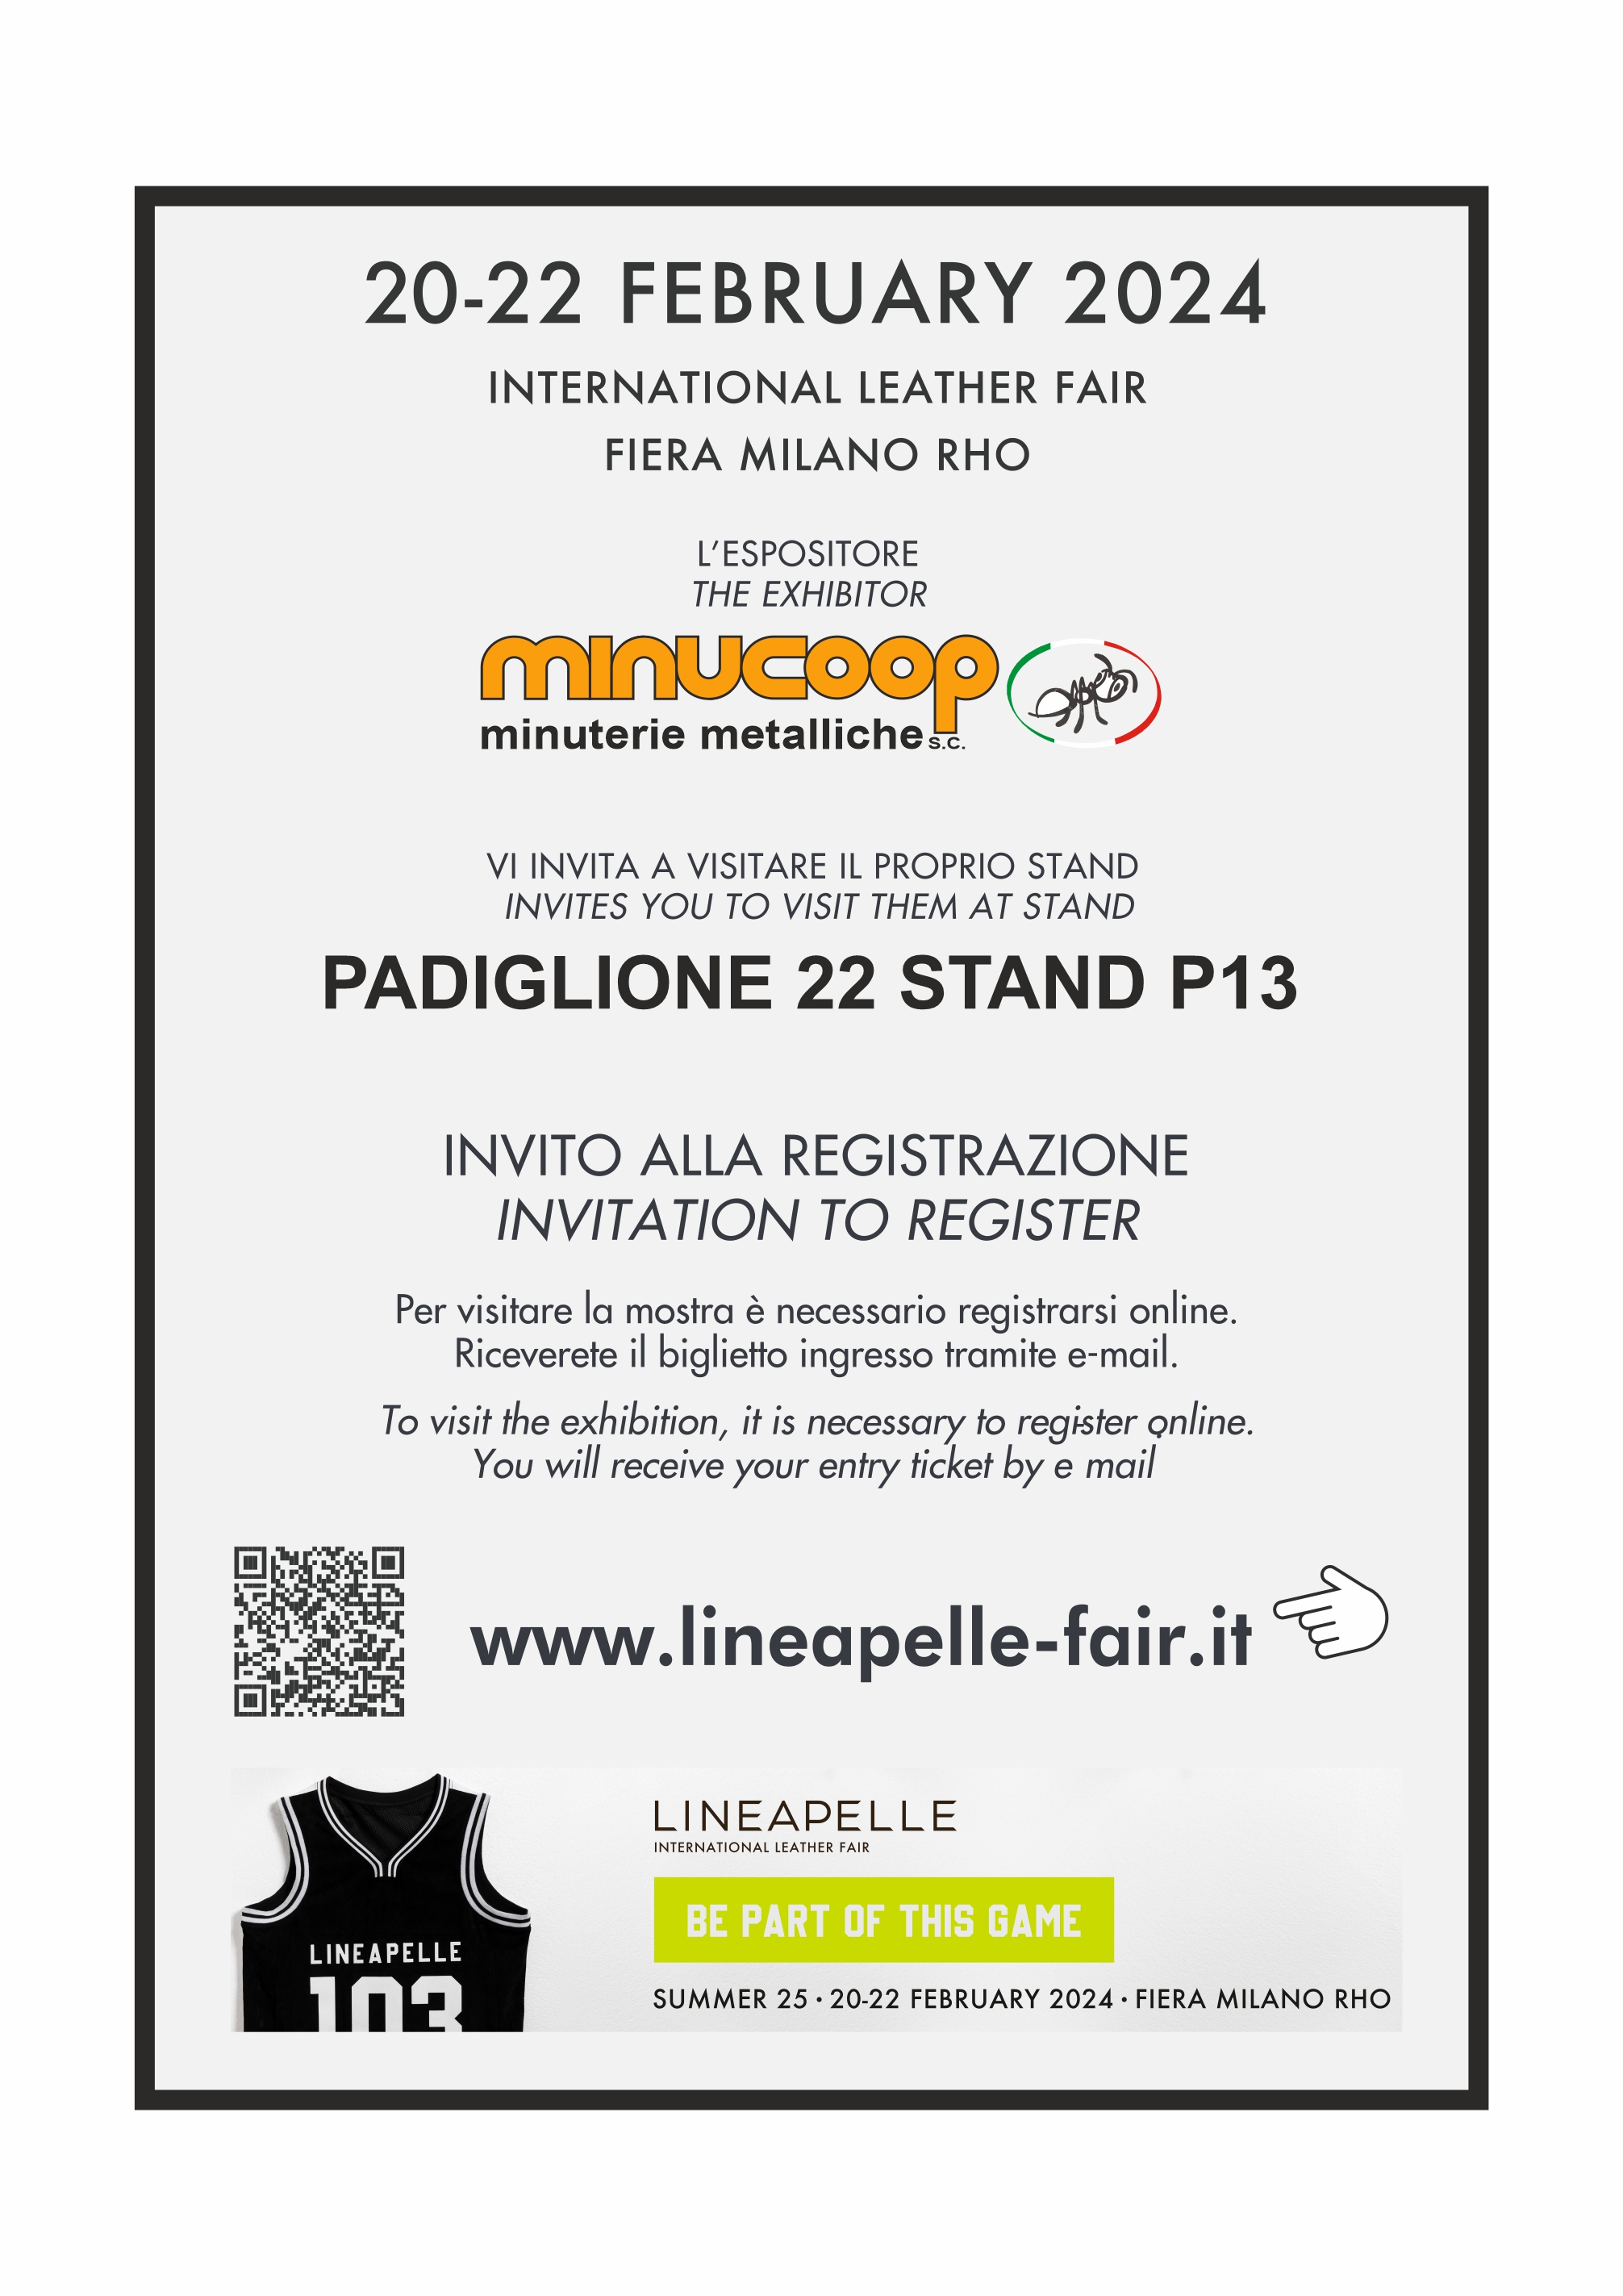 Minucoop s.c. is present at the lineapelle fair february 2024